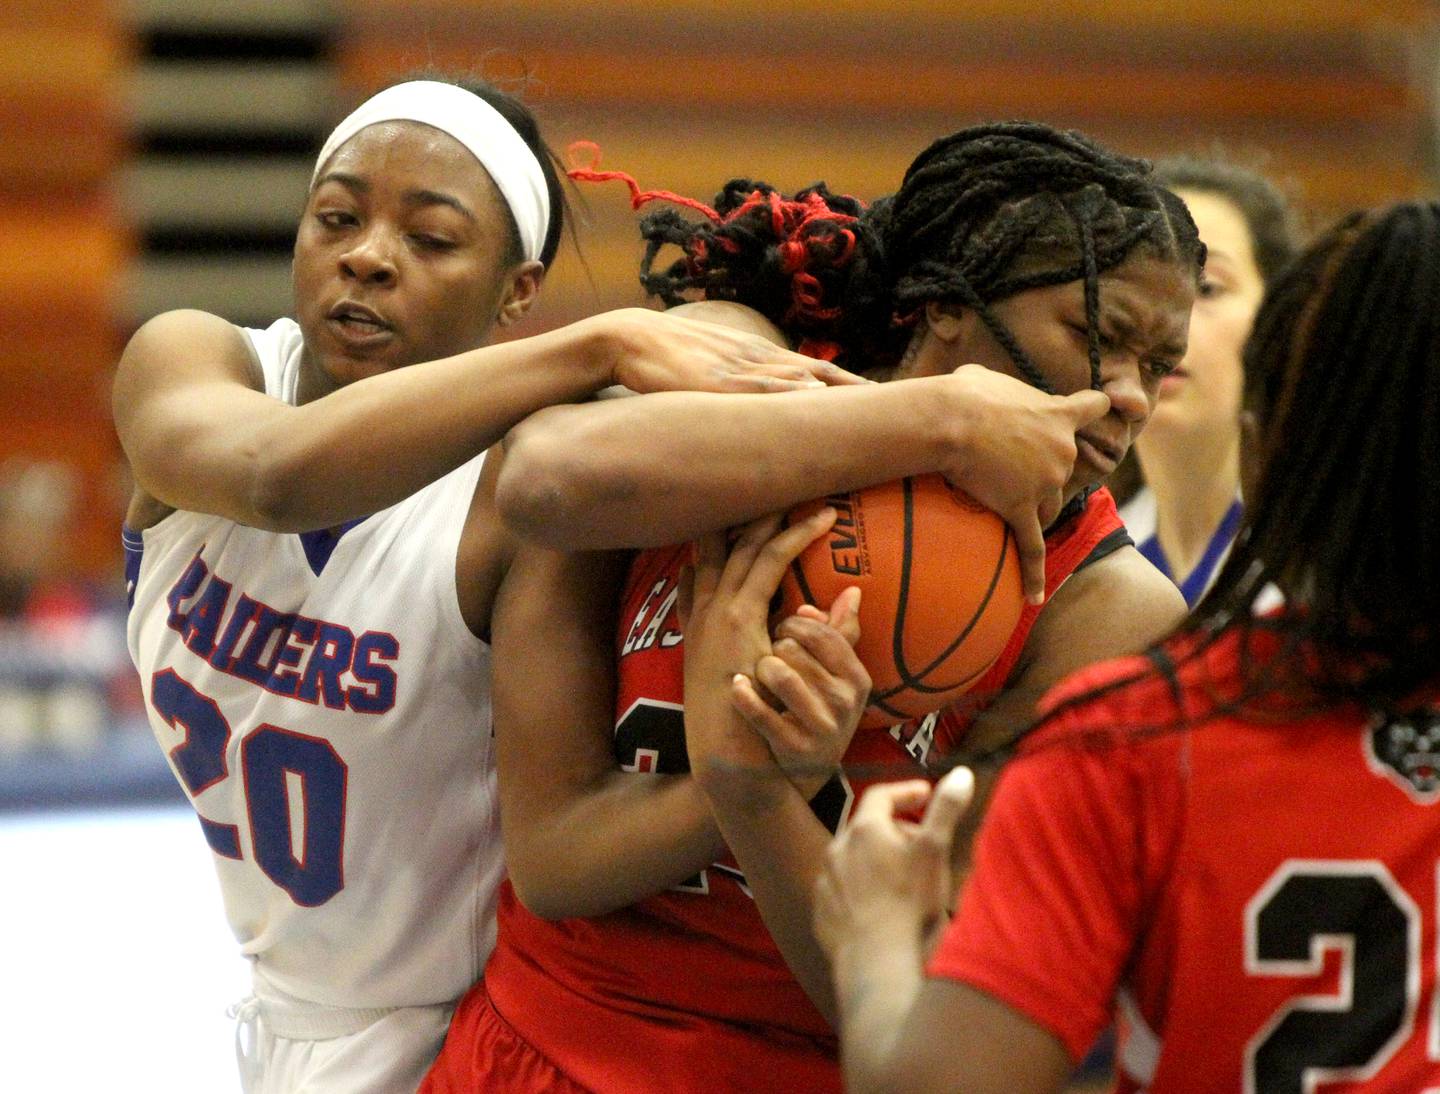 Glenbard South’s Brooklynn Moore (left) and East Aurora’s Anastasia Bellamy (right) get a jump ball call during a game at Glenbard South in Glen Ellyn on Thursday, Jan. 26, 2023.